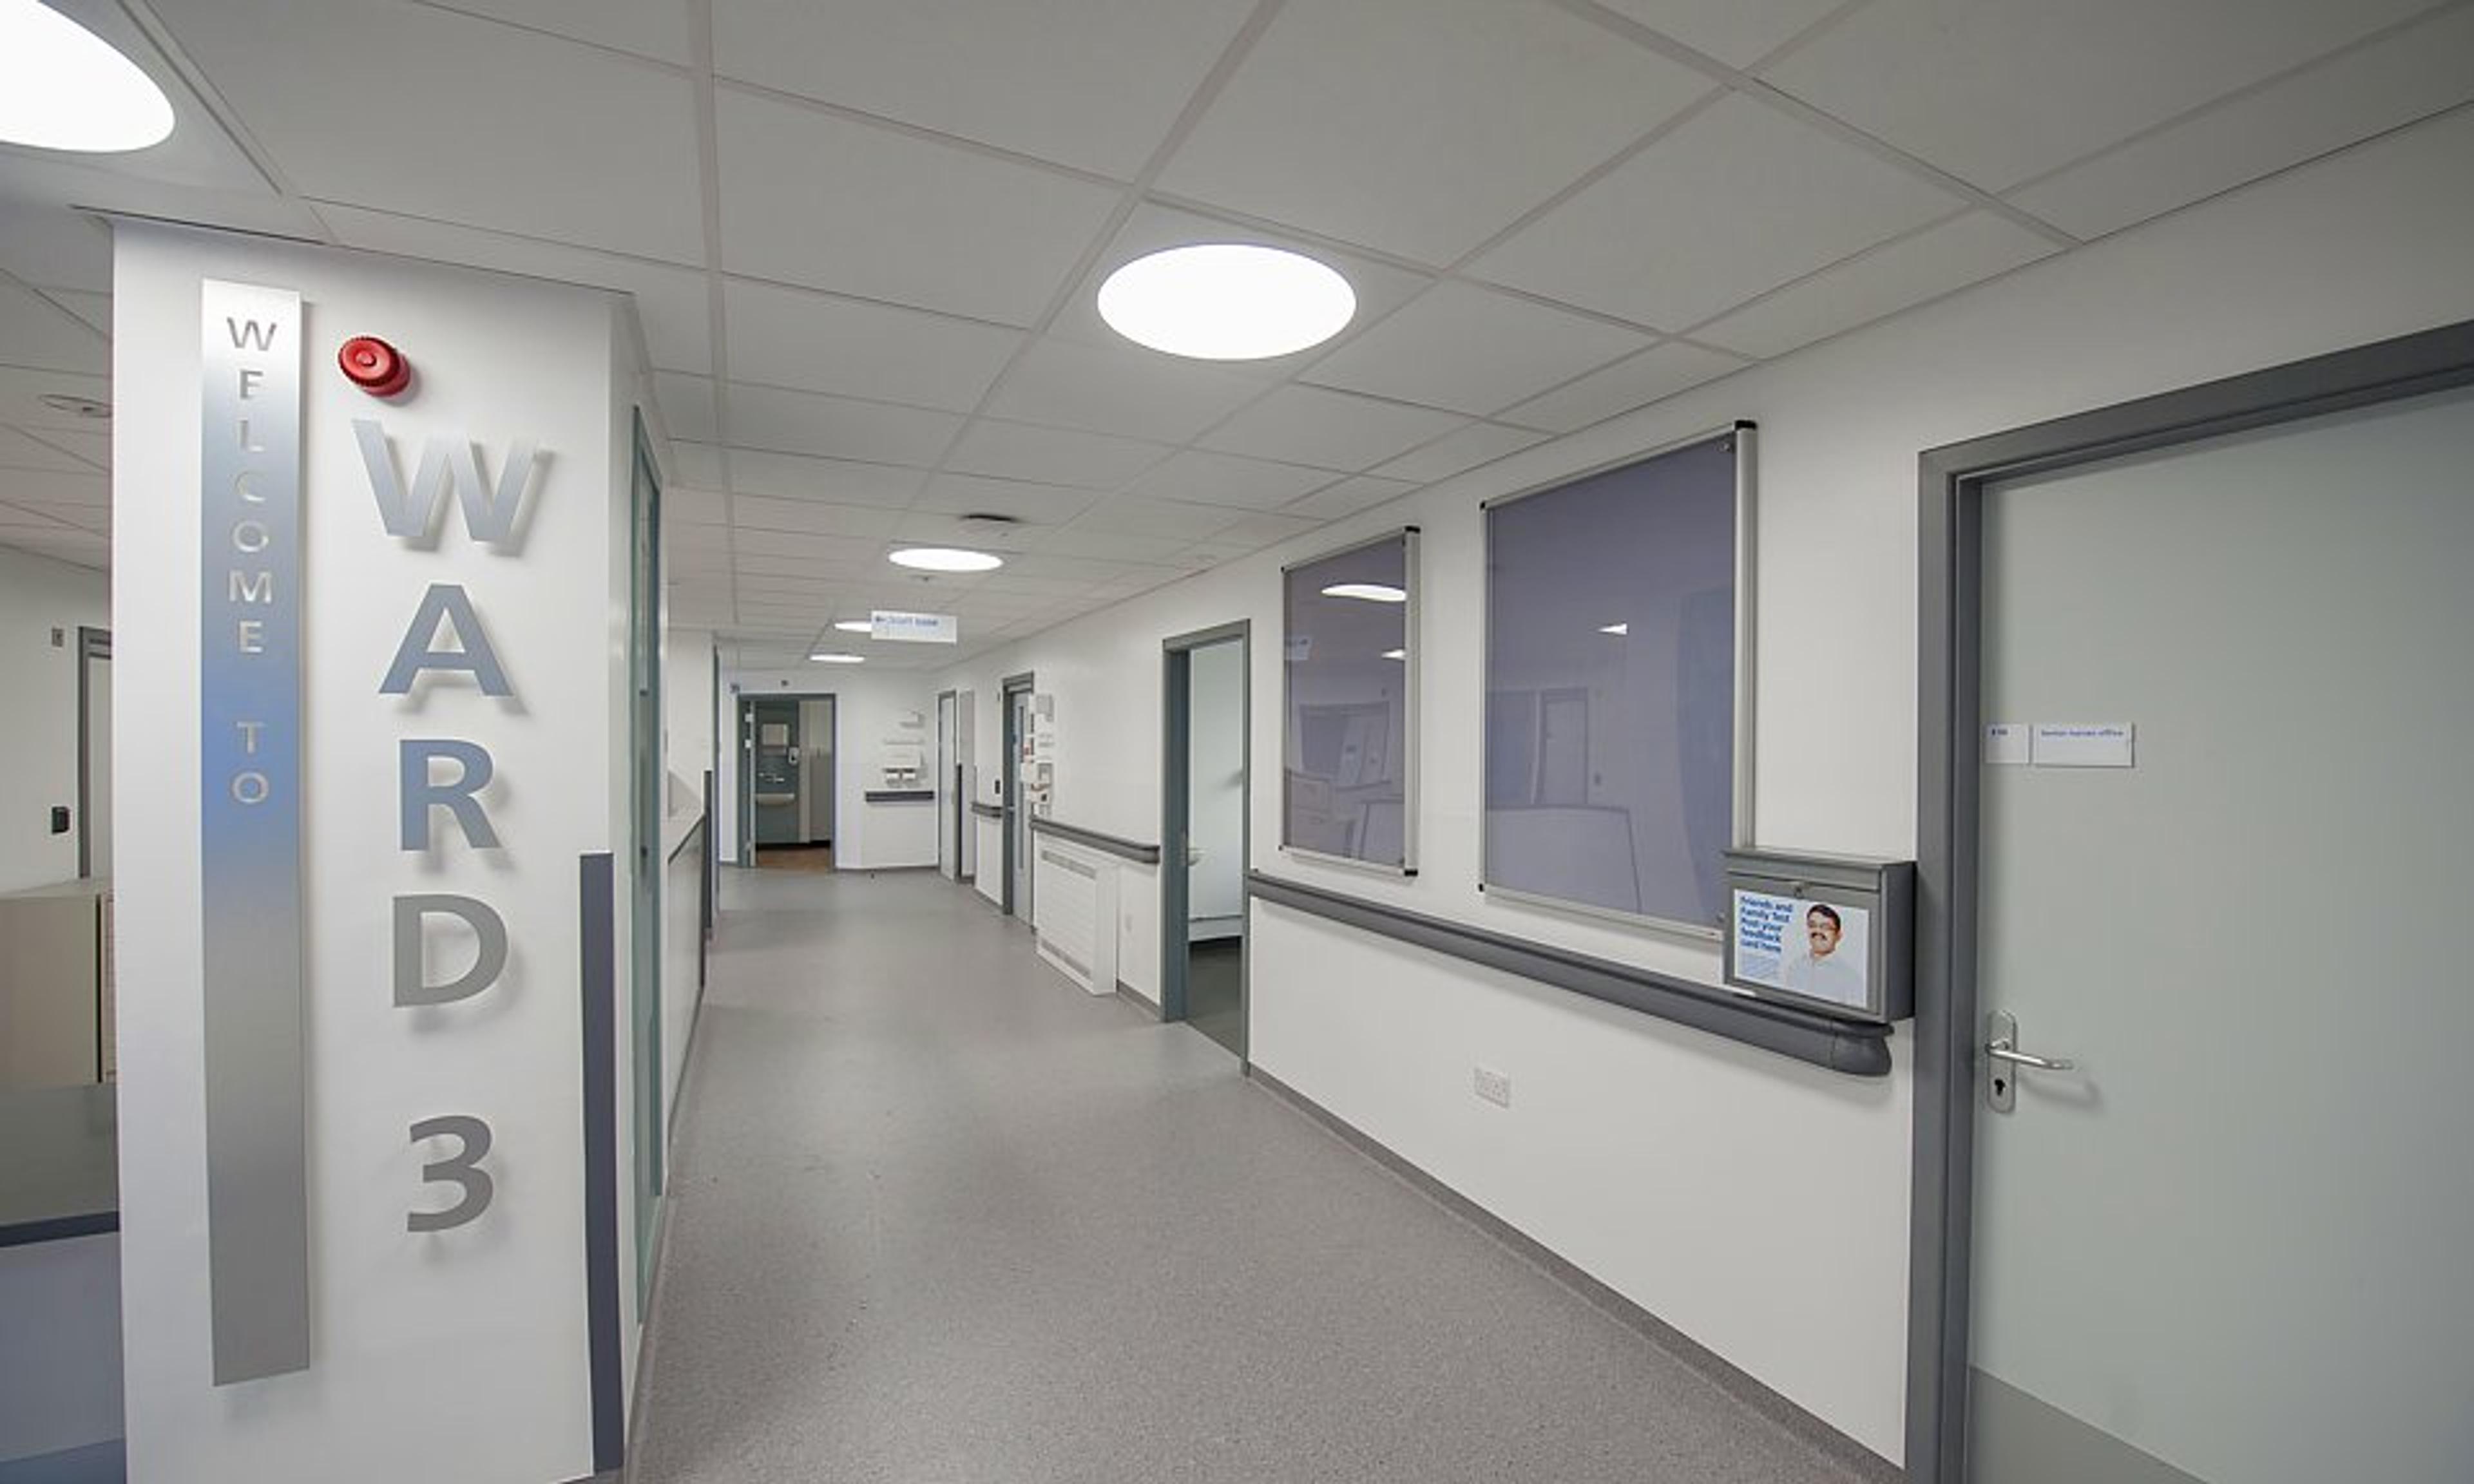 An empty hospital ward - ward three at Weston Park Cancer Centre - is pictured with its lights on.